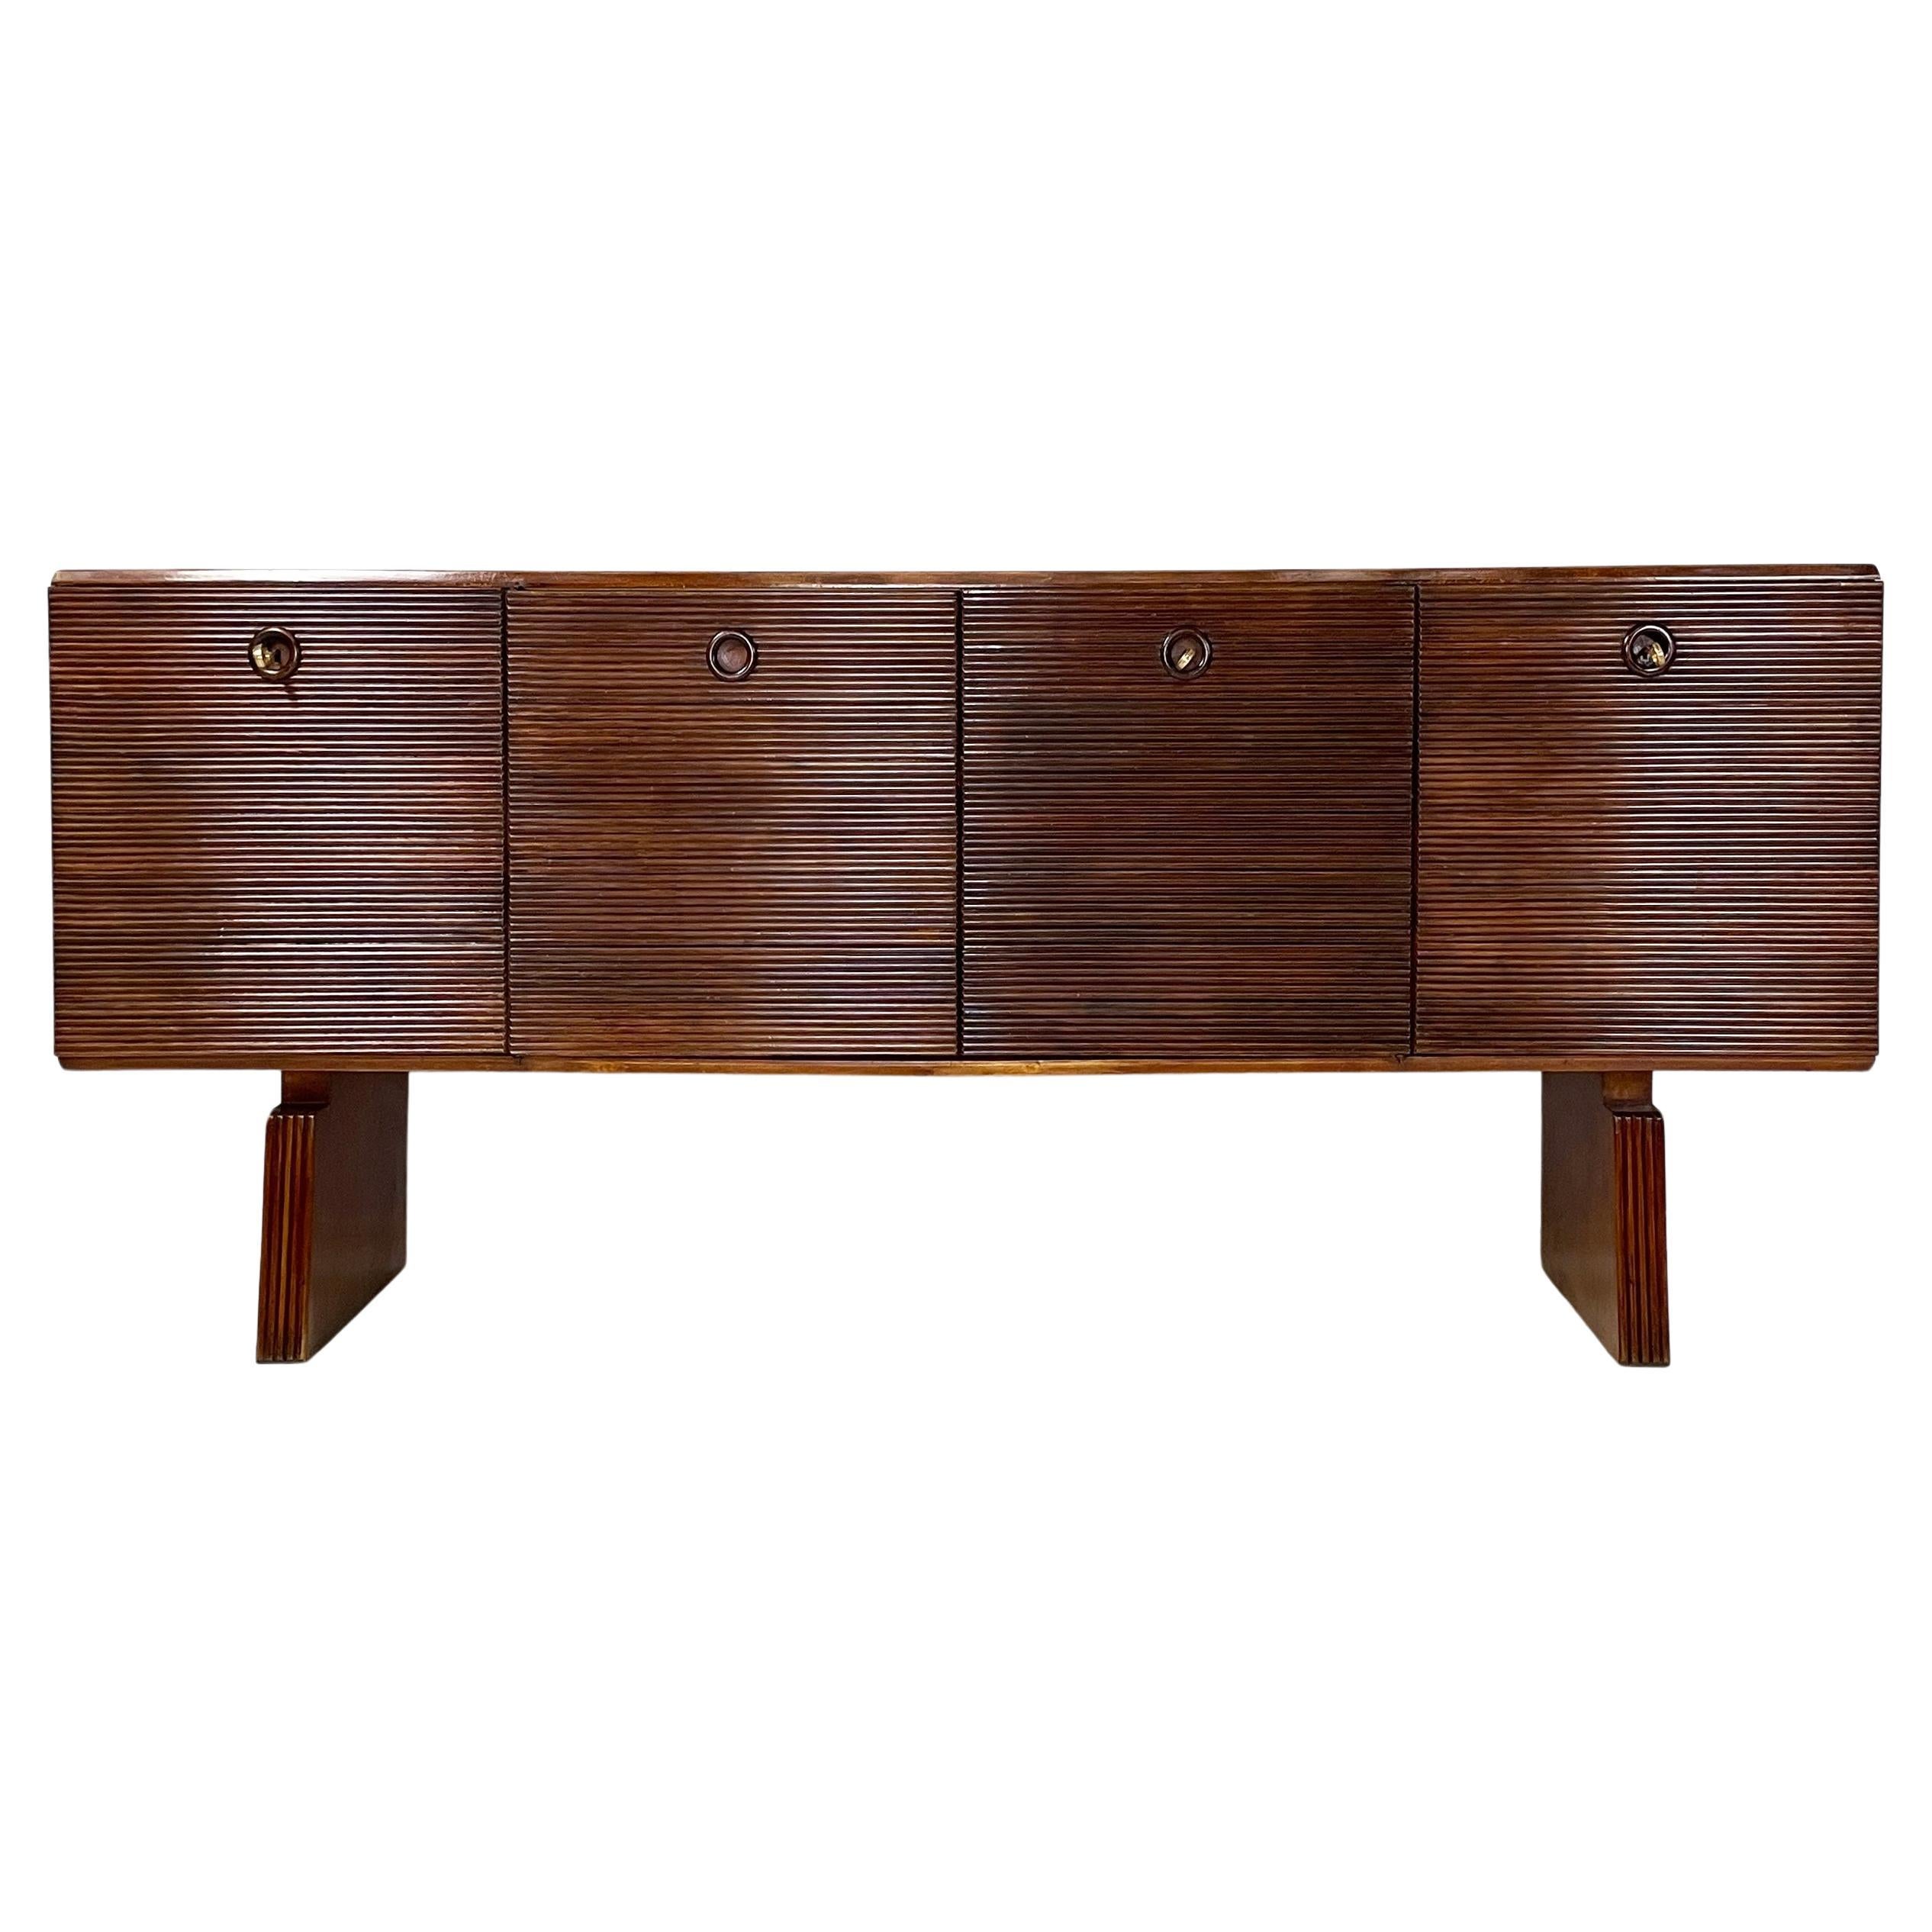 Italian Art Deco wooden sideboard with four doors by Gio Ponti, 1940s  For Sale